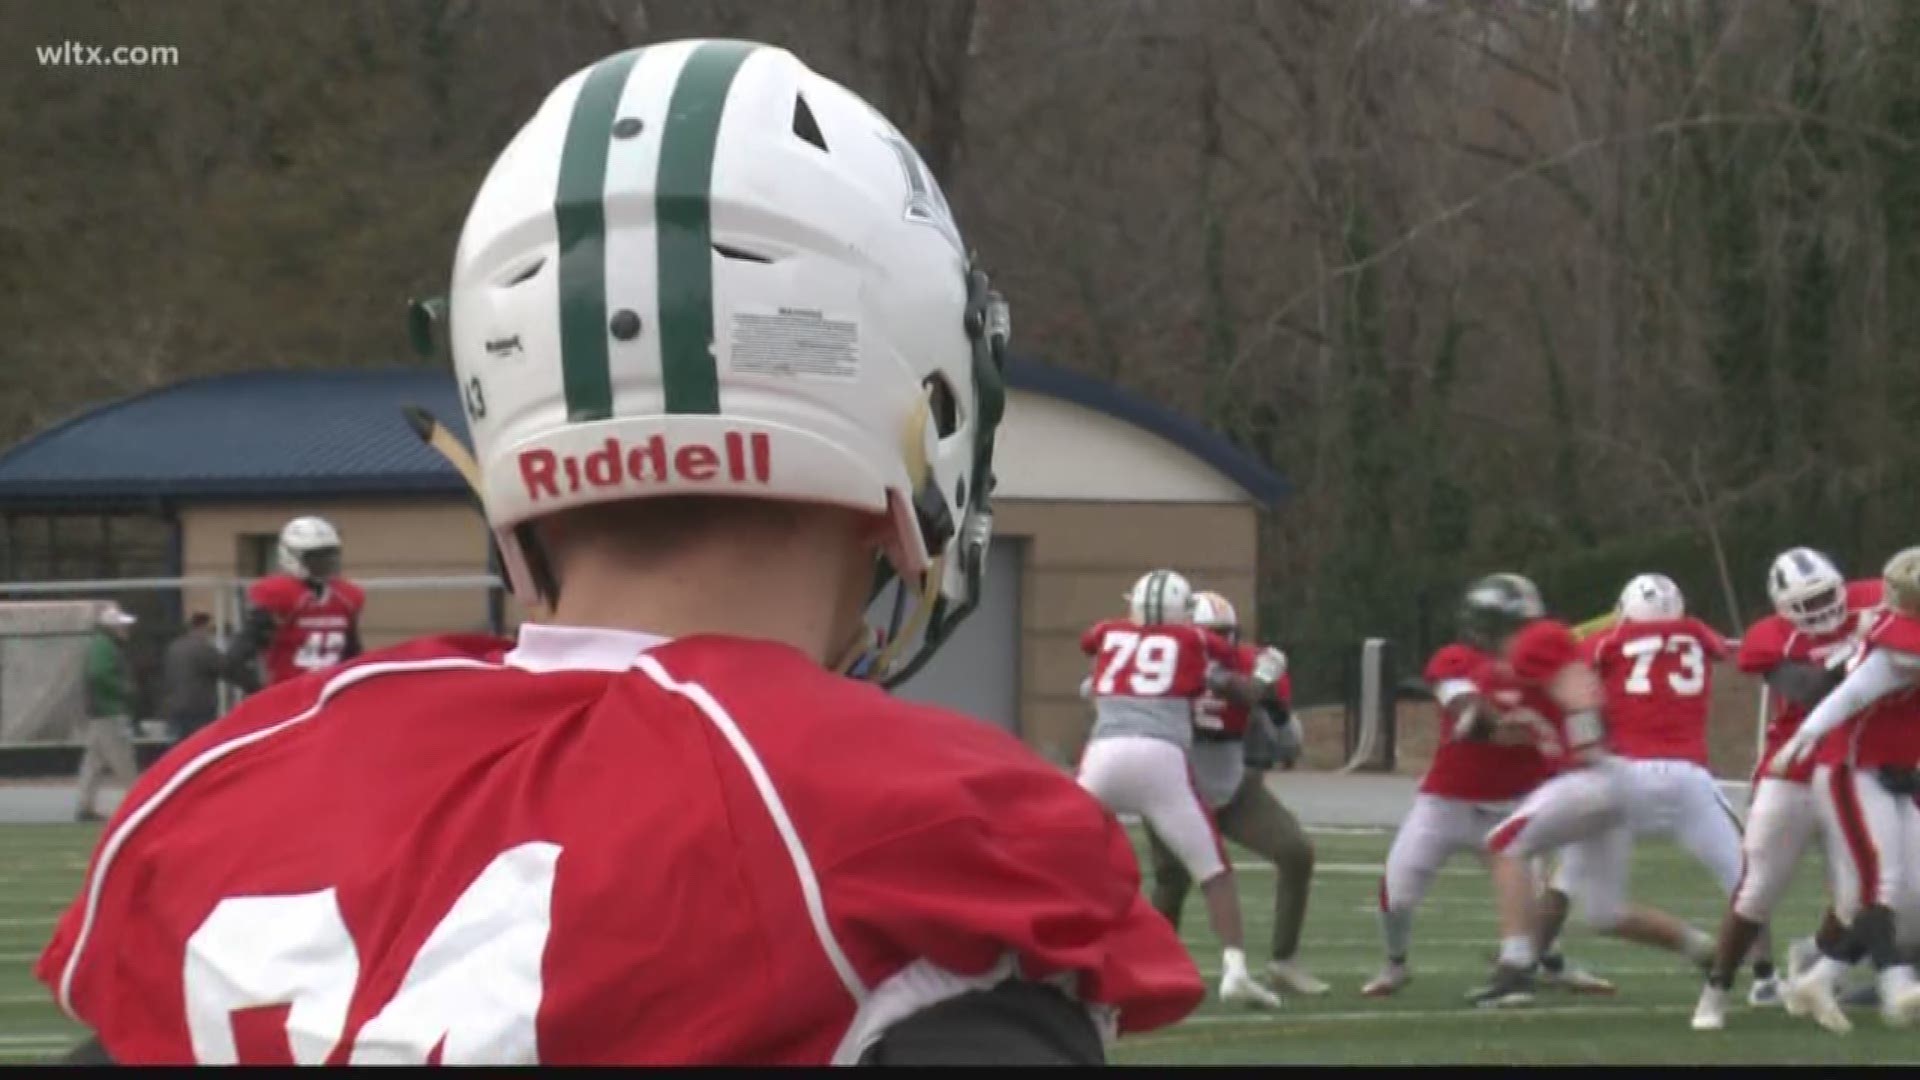 This Dutch Fork Duo is in the midst of Shrine Bowl practice in Spartanburg.